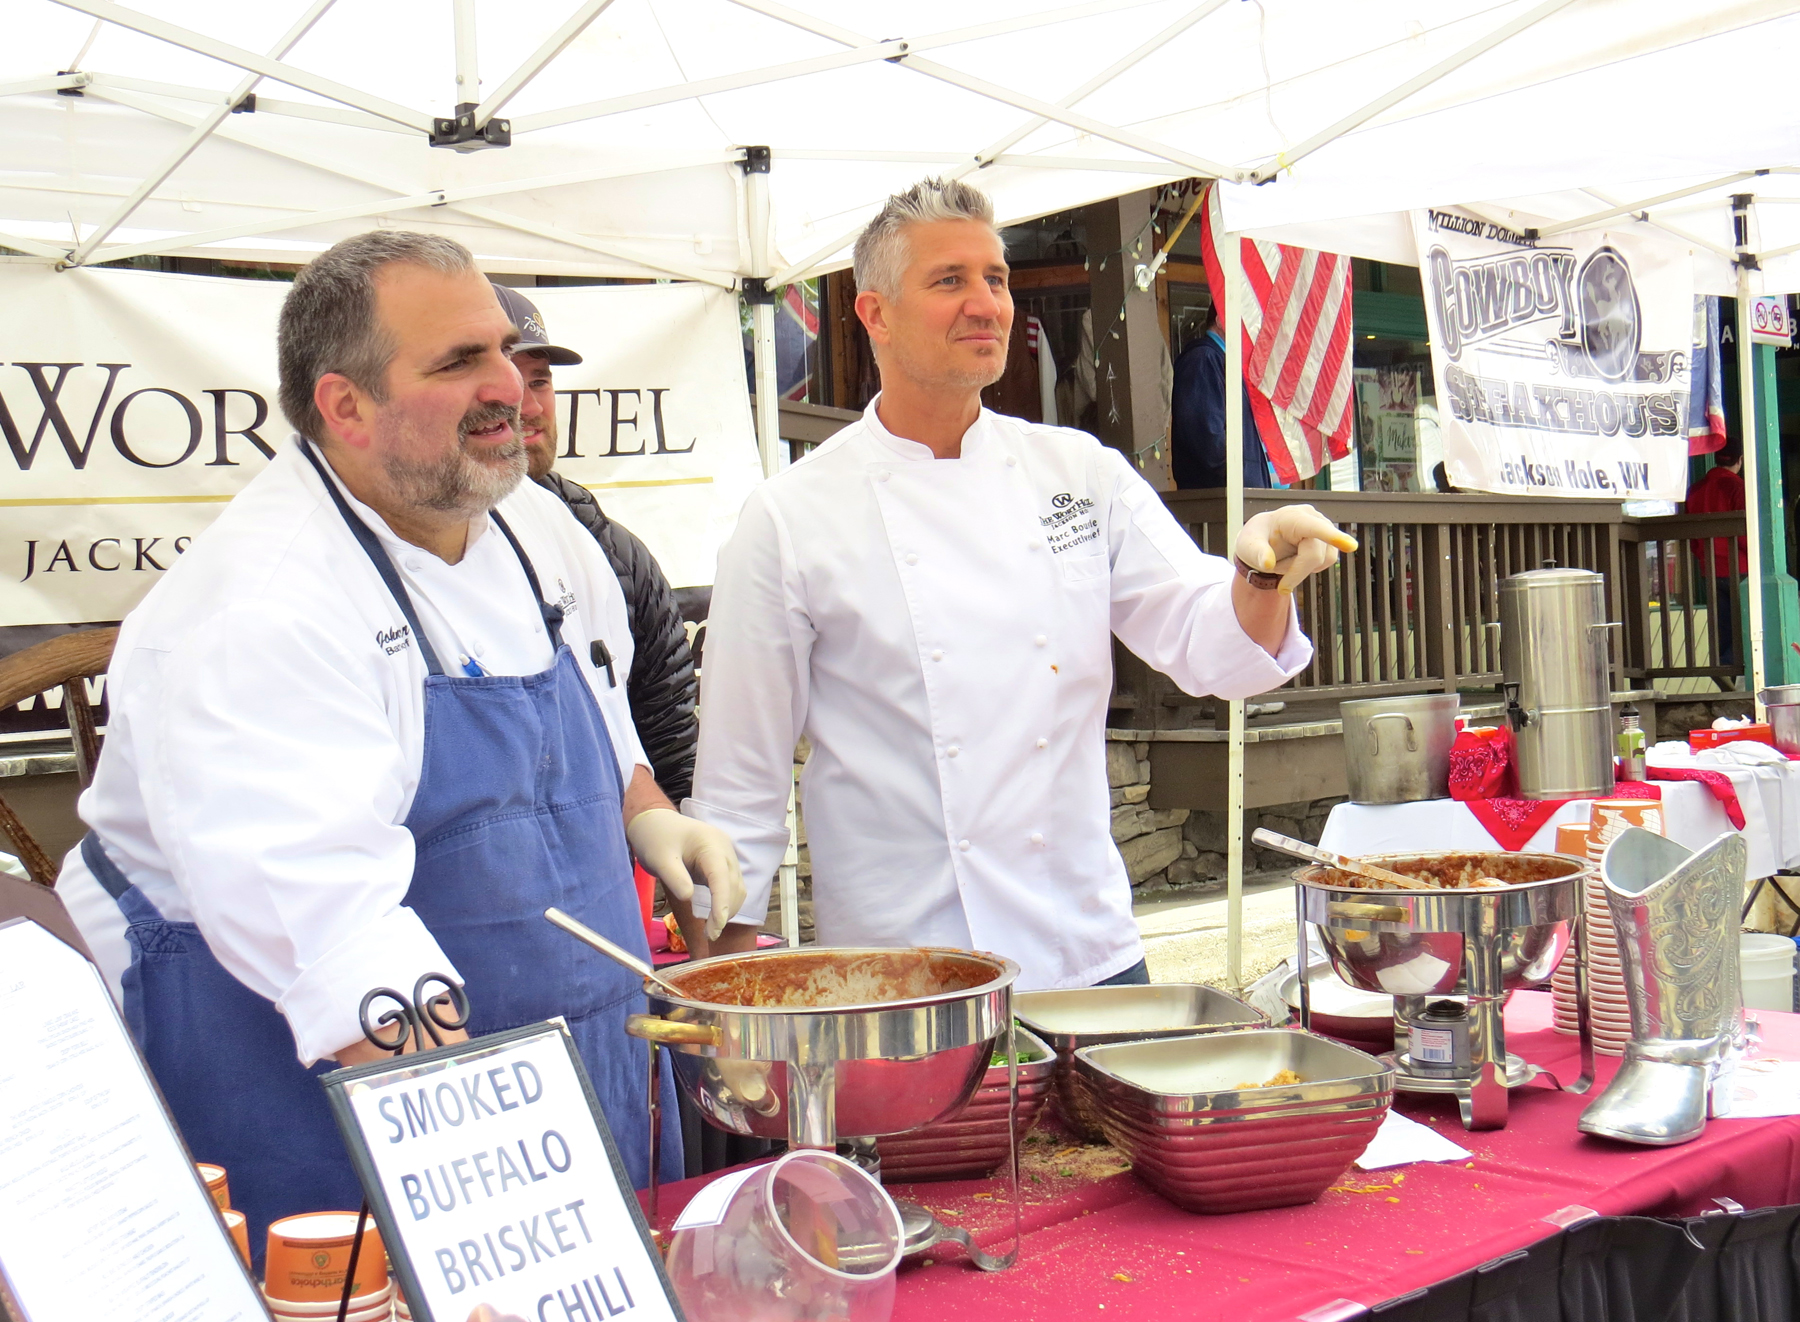 The popular High Noon Chili Cook-off closes ElkFest weekend on Sunday, May 21, with visitors tasting Jackson Hole’s finest variations on the hot stuff – and voting their best-of-the-West favorite.